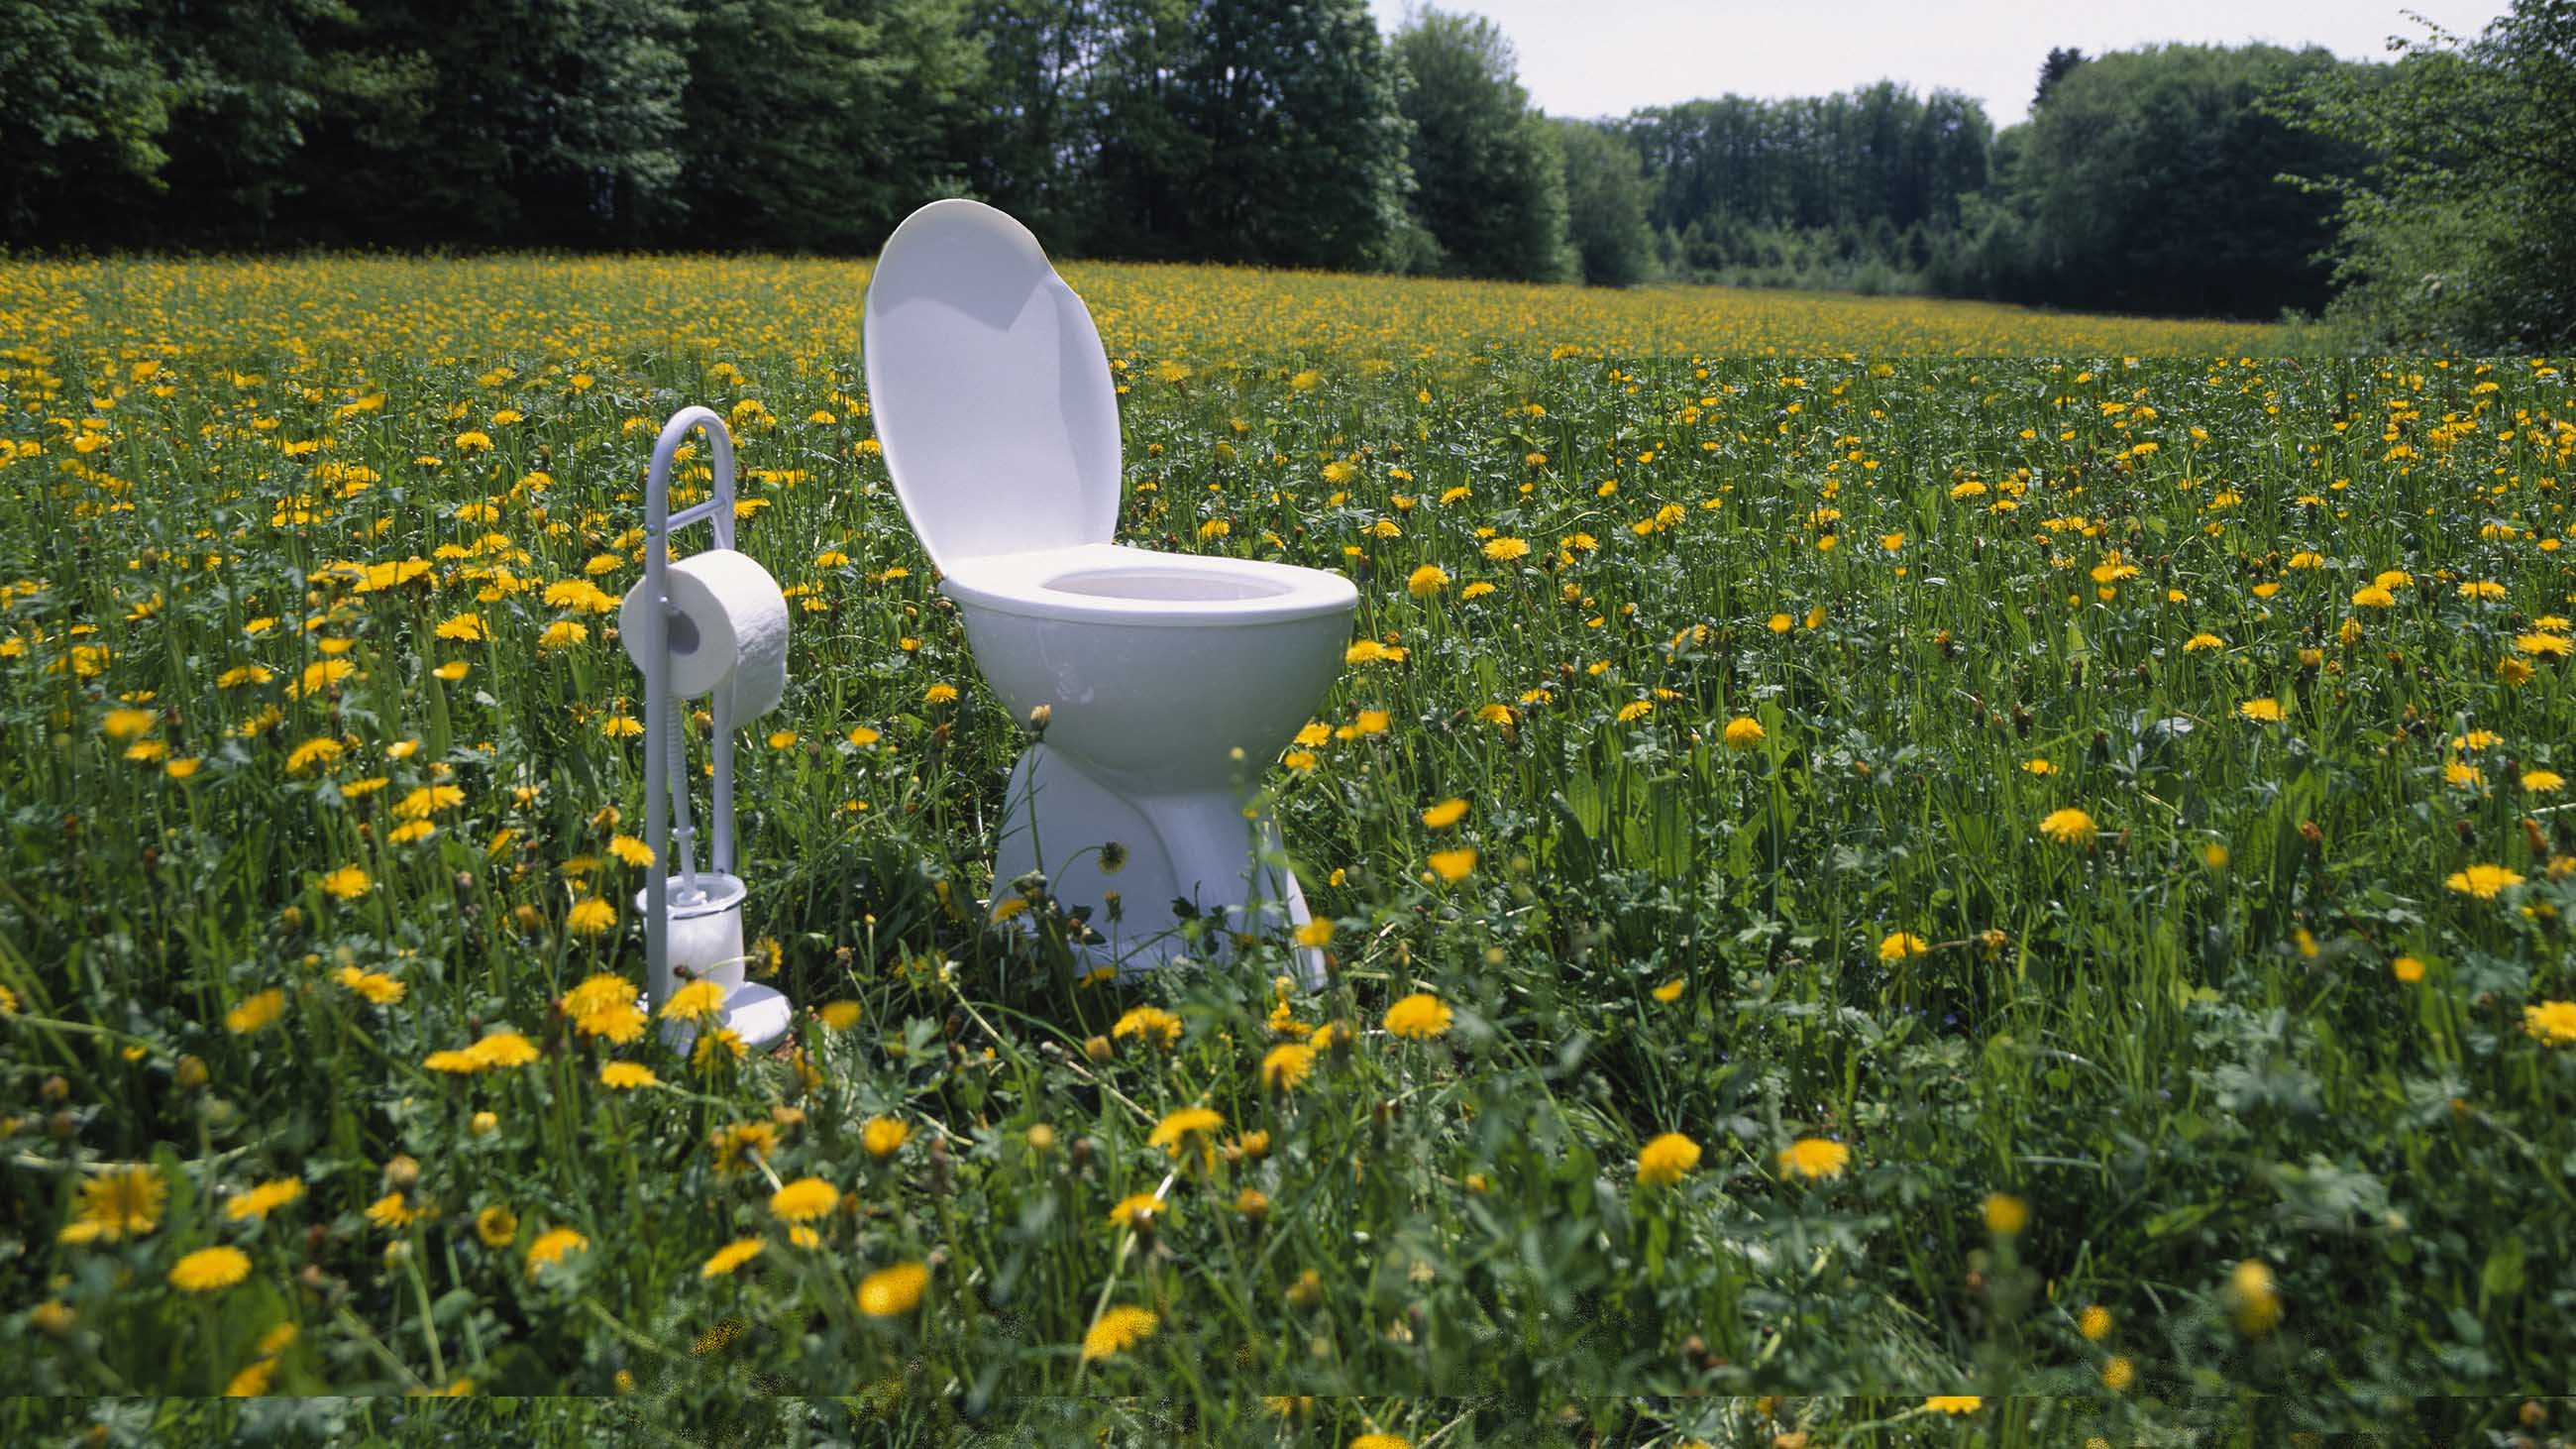 Toilet and toilet paper holder in field of dandelions